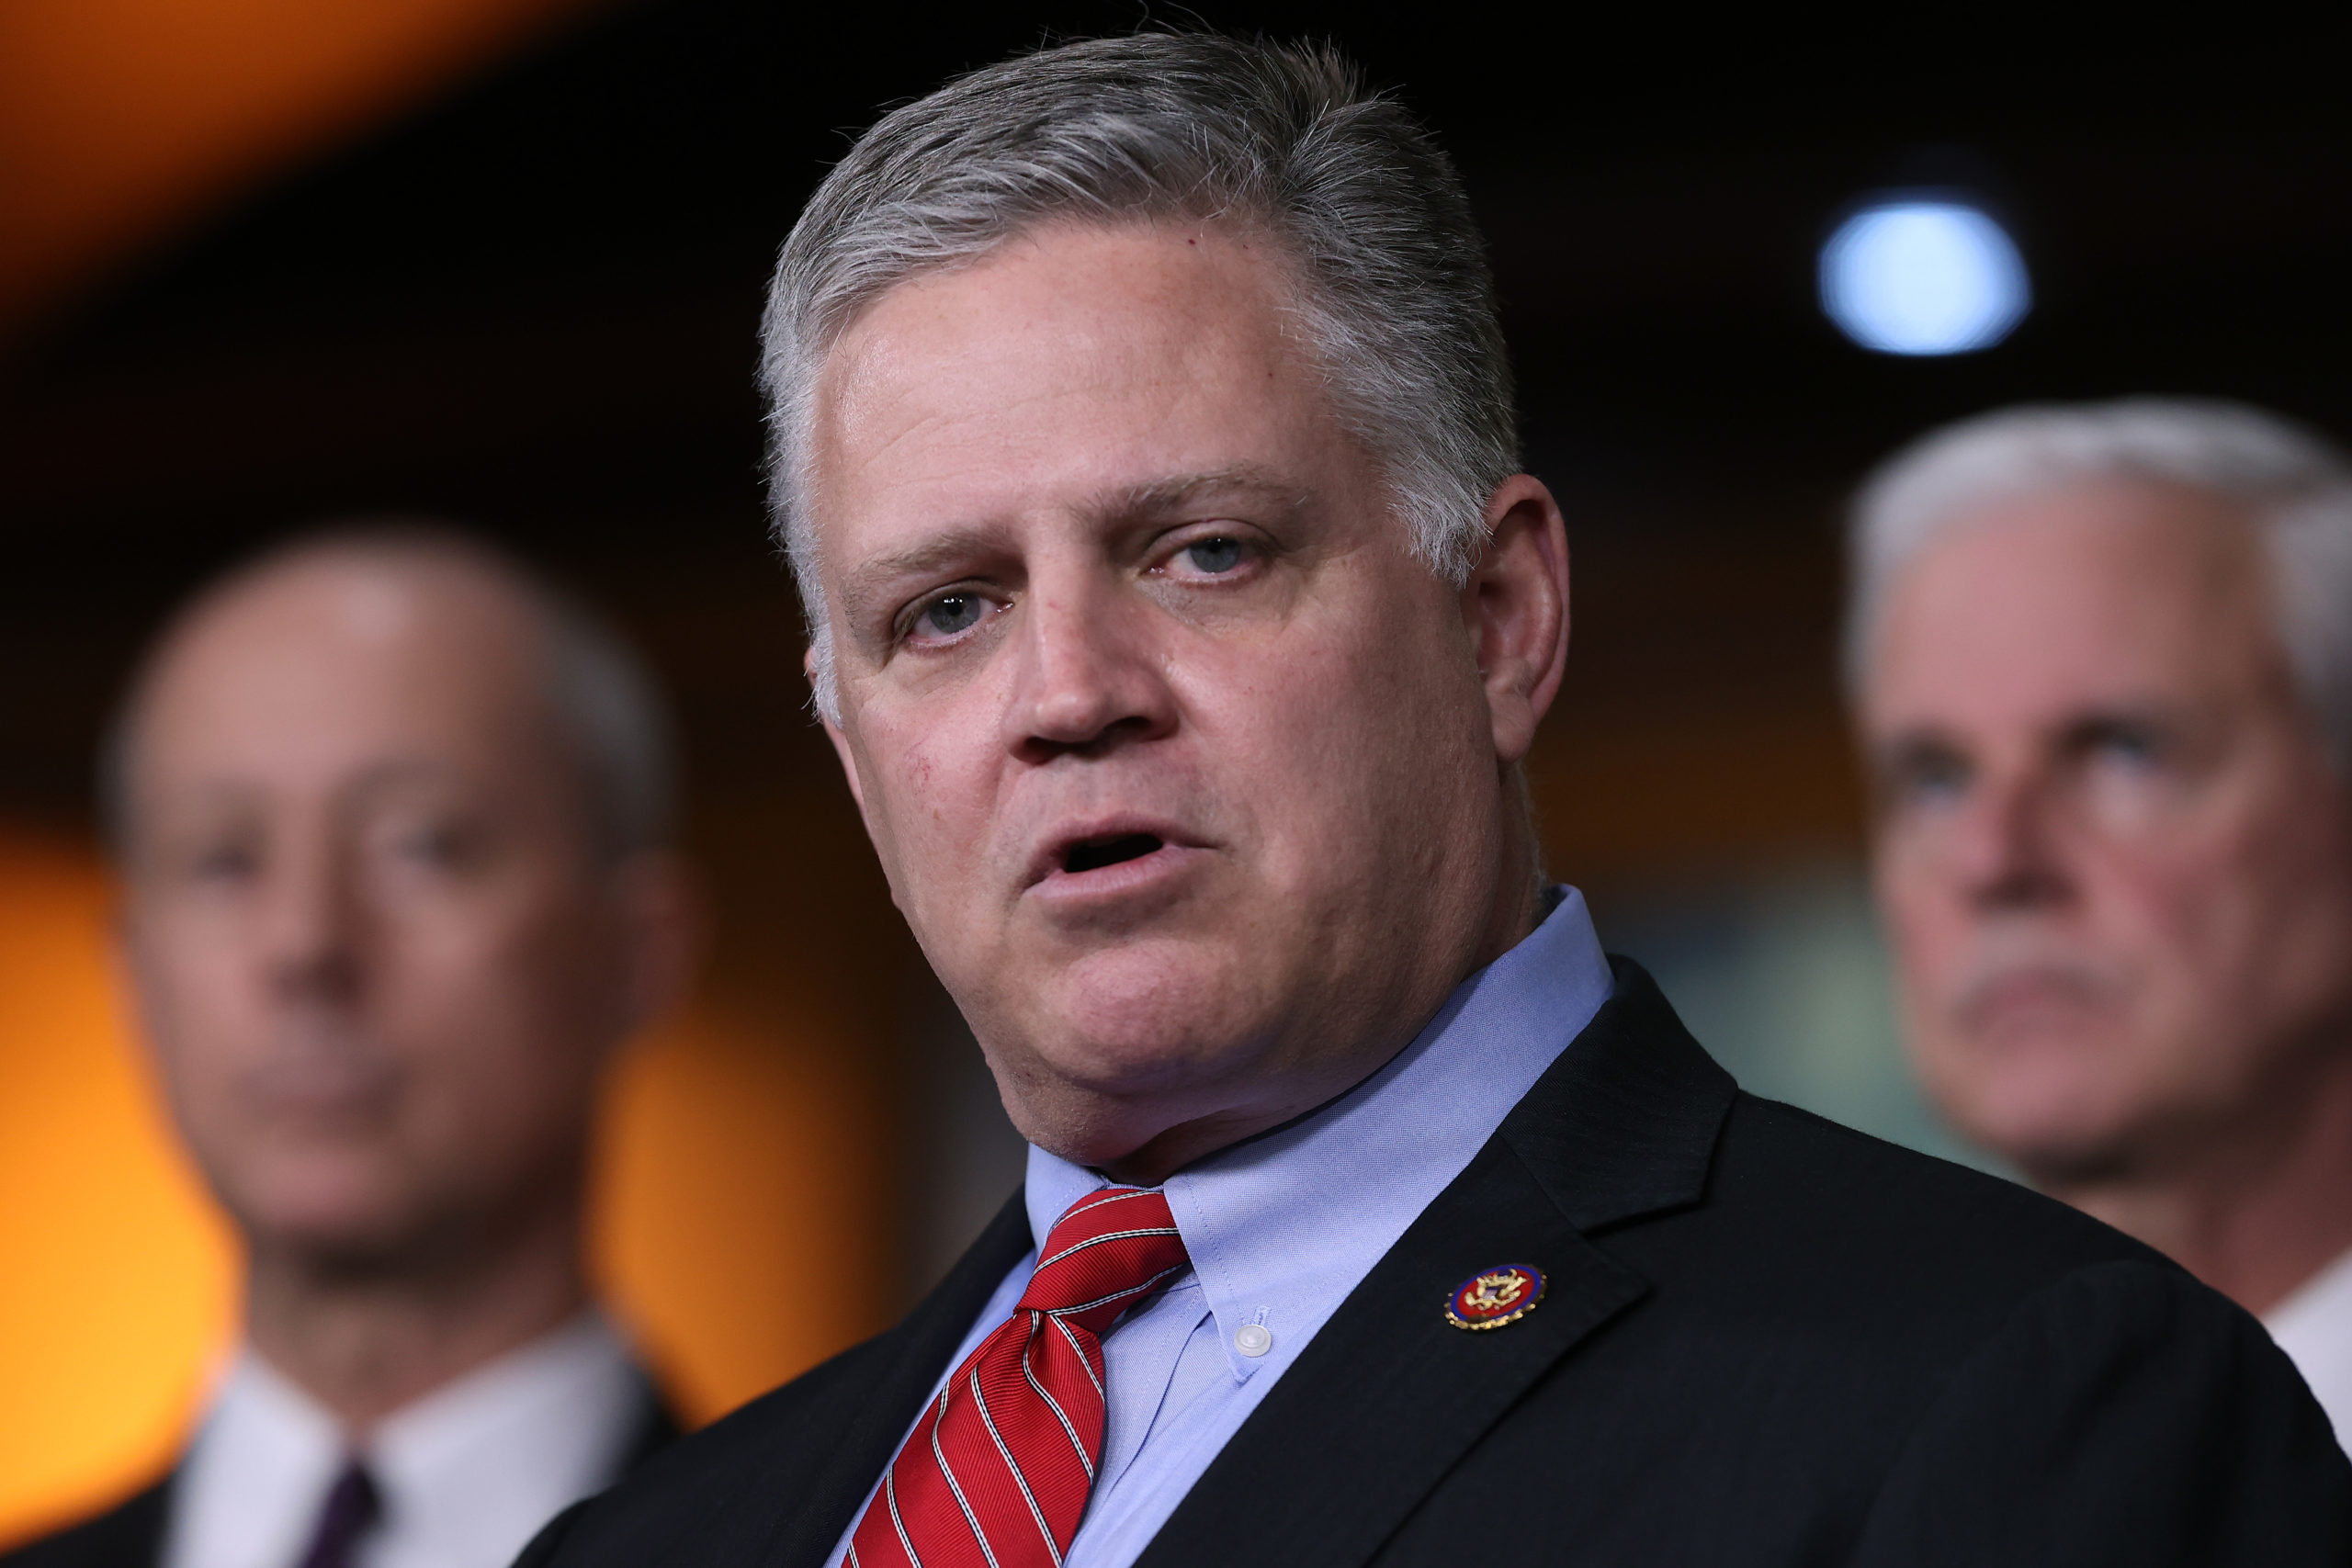 Rep. Drew Ferguson (R-GA) talks to reporters with Rep. Mac Thornberry (R-TX) (L) and Rep. Steve Womack (R-AR) following the weekly GOP caucus meeting at the U.S. Capitol February 11, 2020 in Washington, DC. (Photo by Chip Somodevilla/Getty Images)